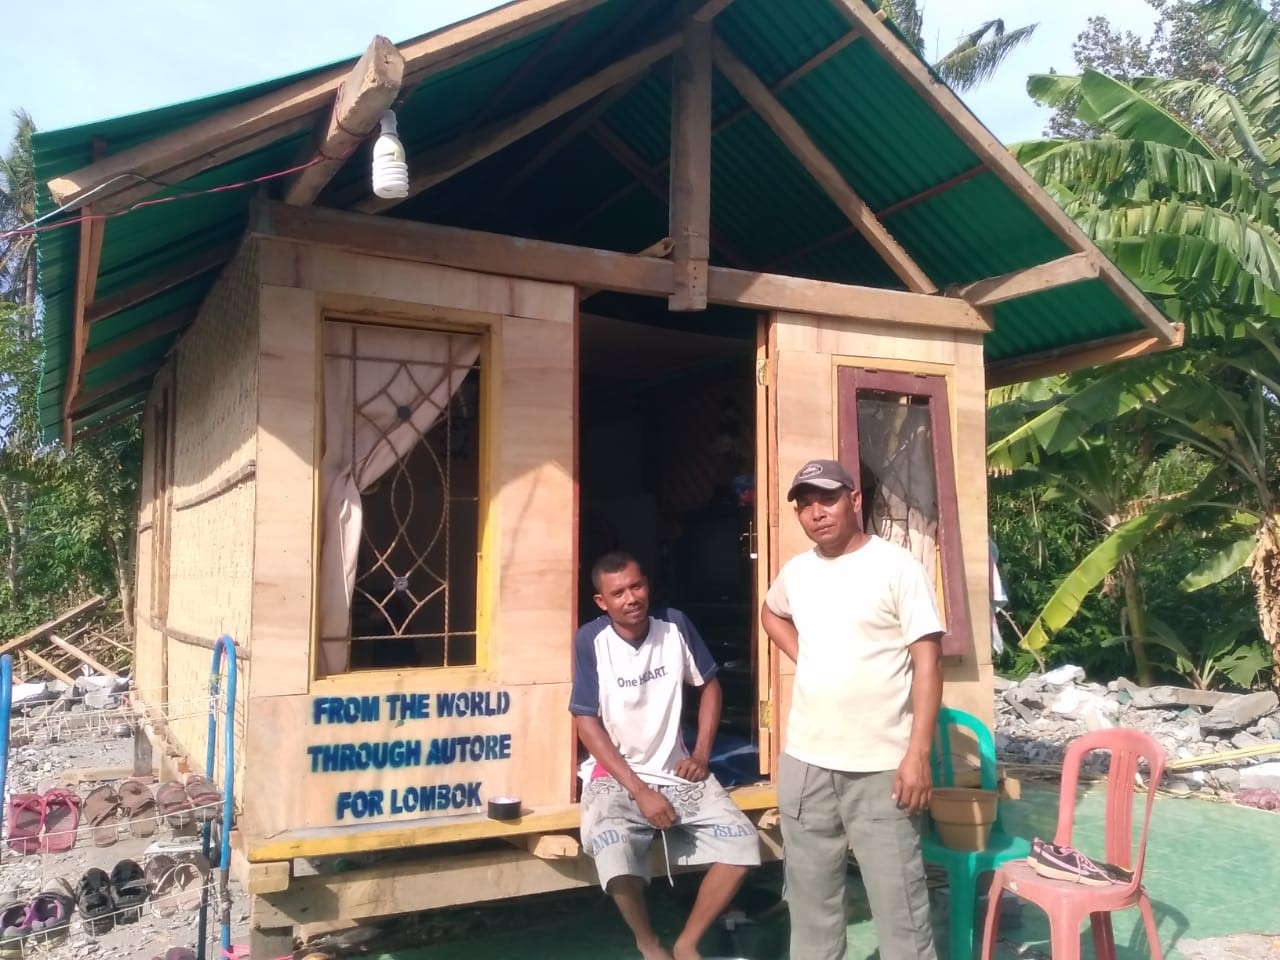 One of the shelters built by The Autore Group in East Lombok